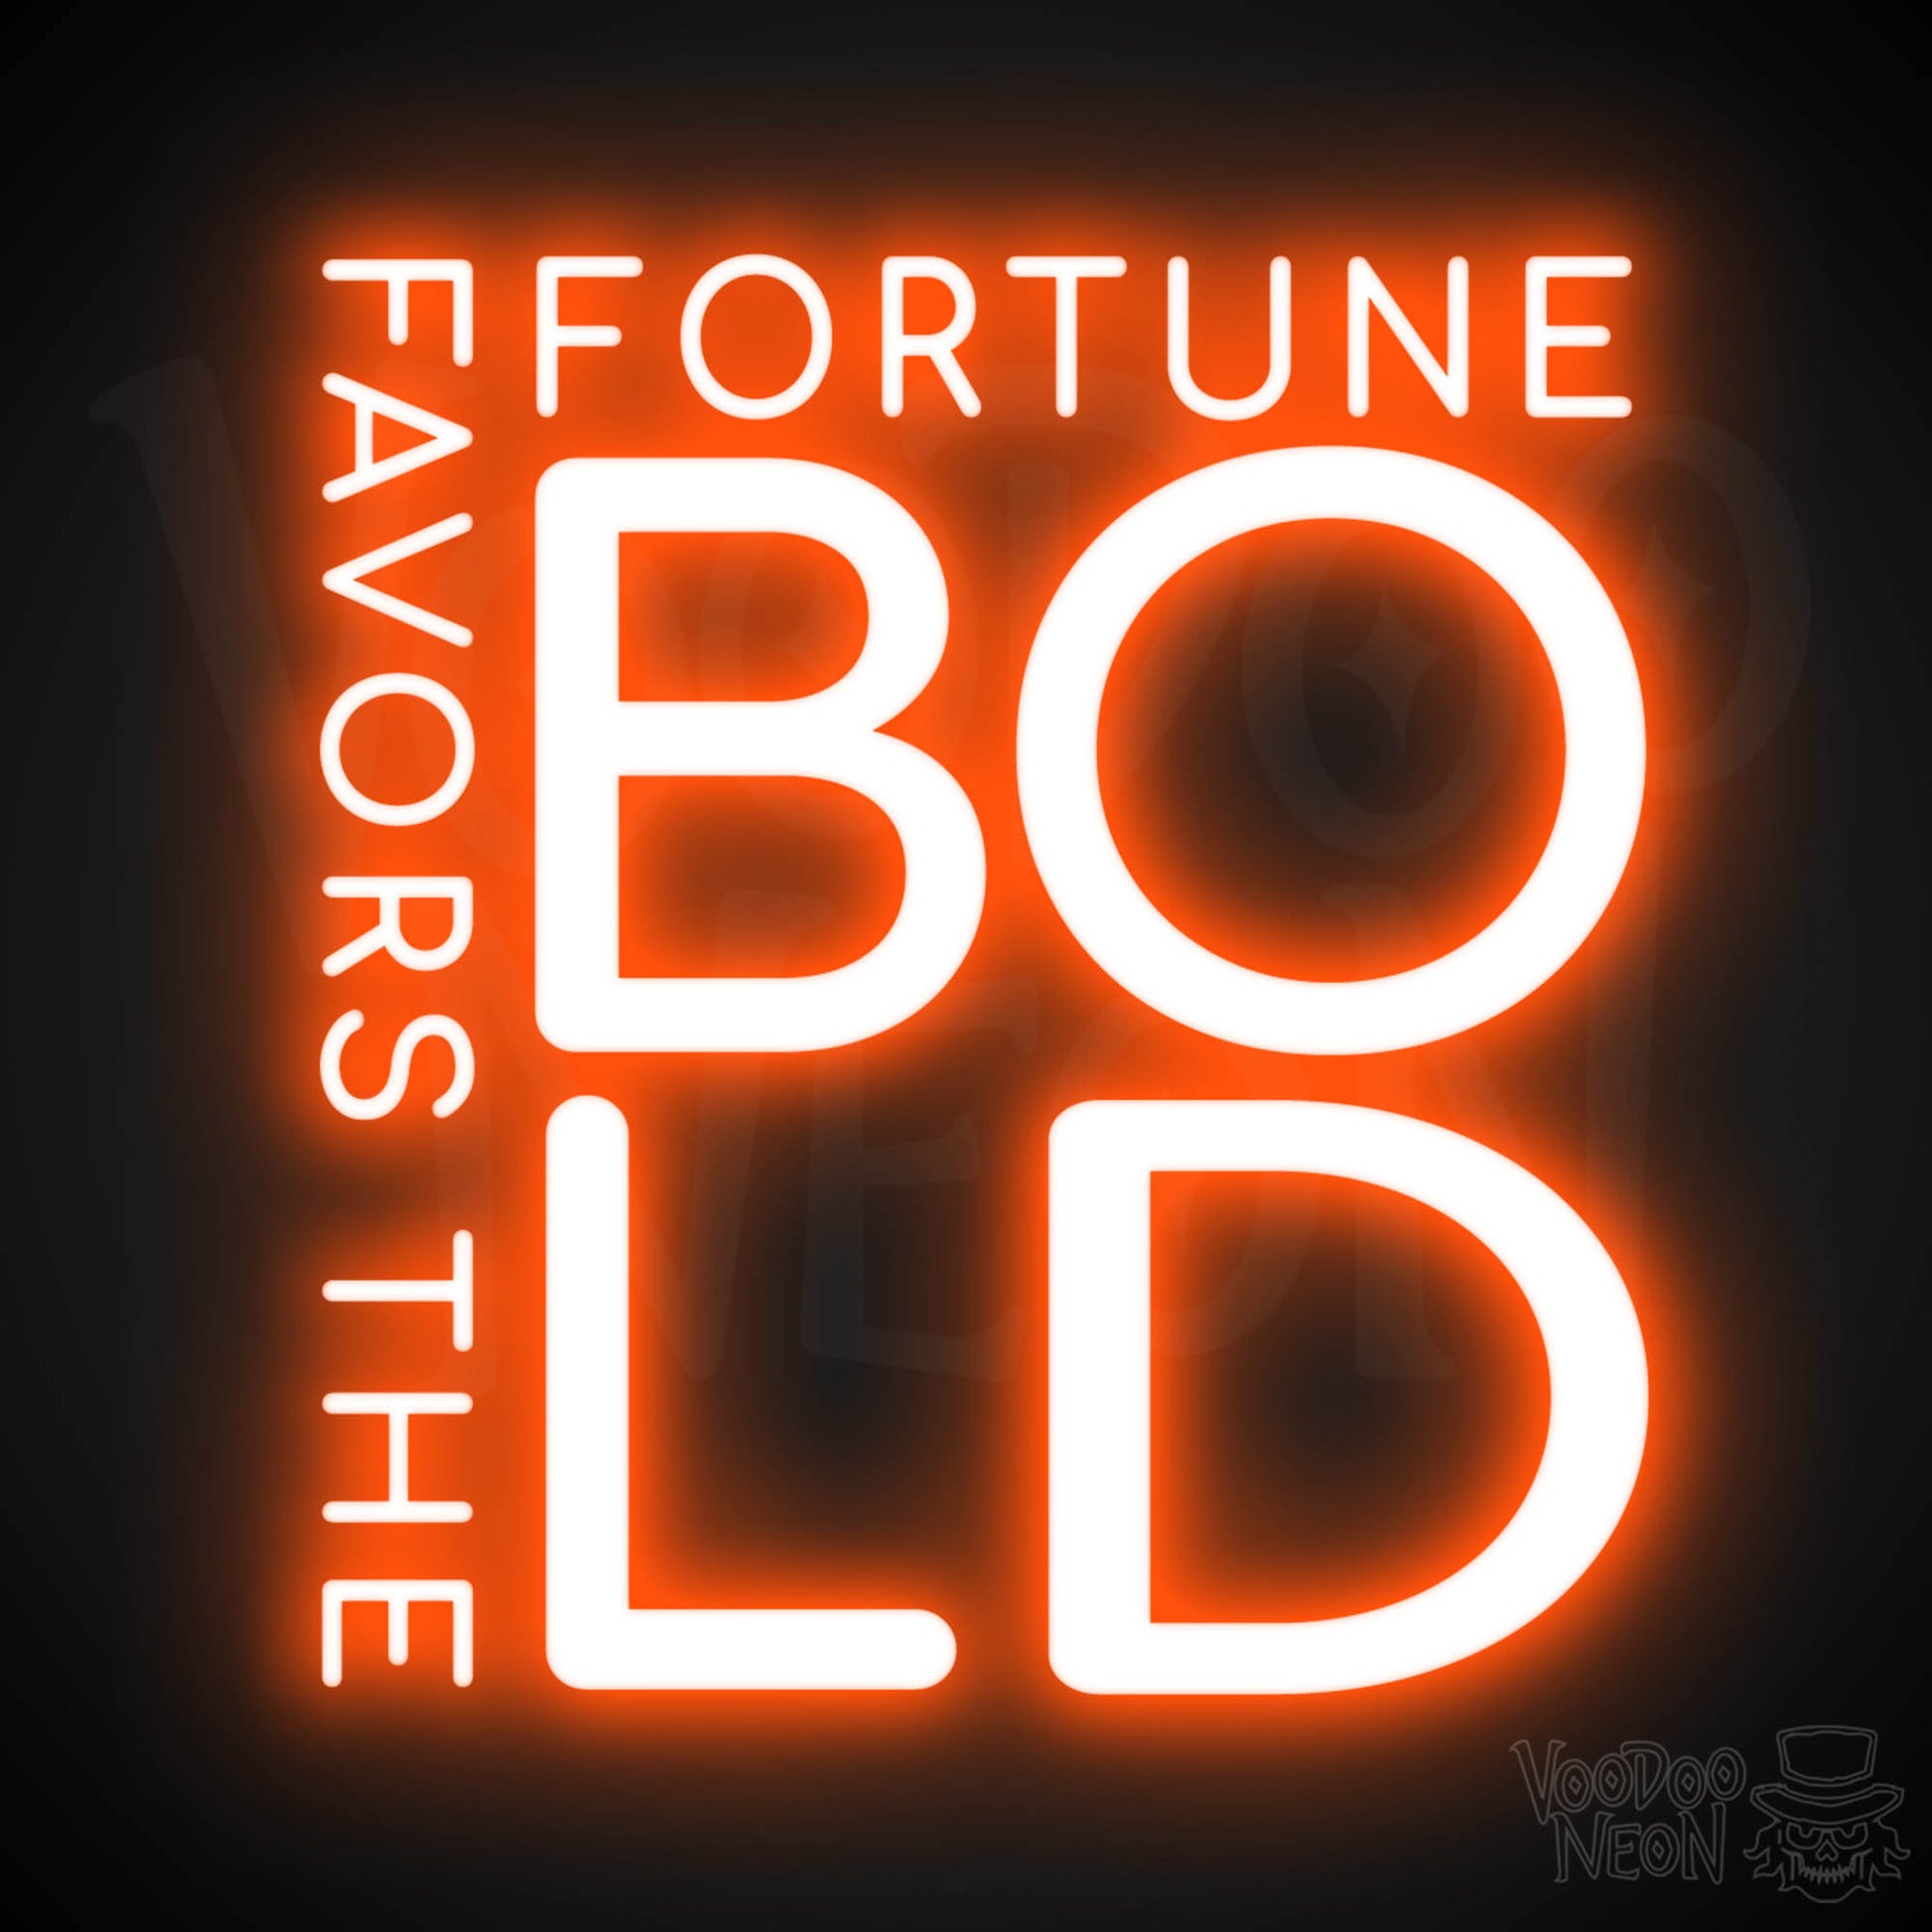 Fortune Favors The Bold Neon Sign - Neon Fortune Favors The Bold Sign - LED Wall Art - Color Orange